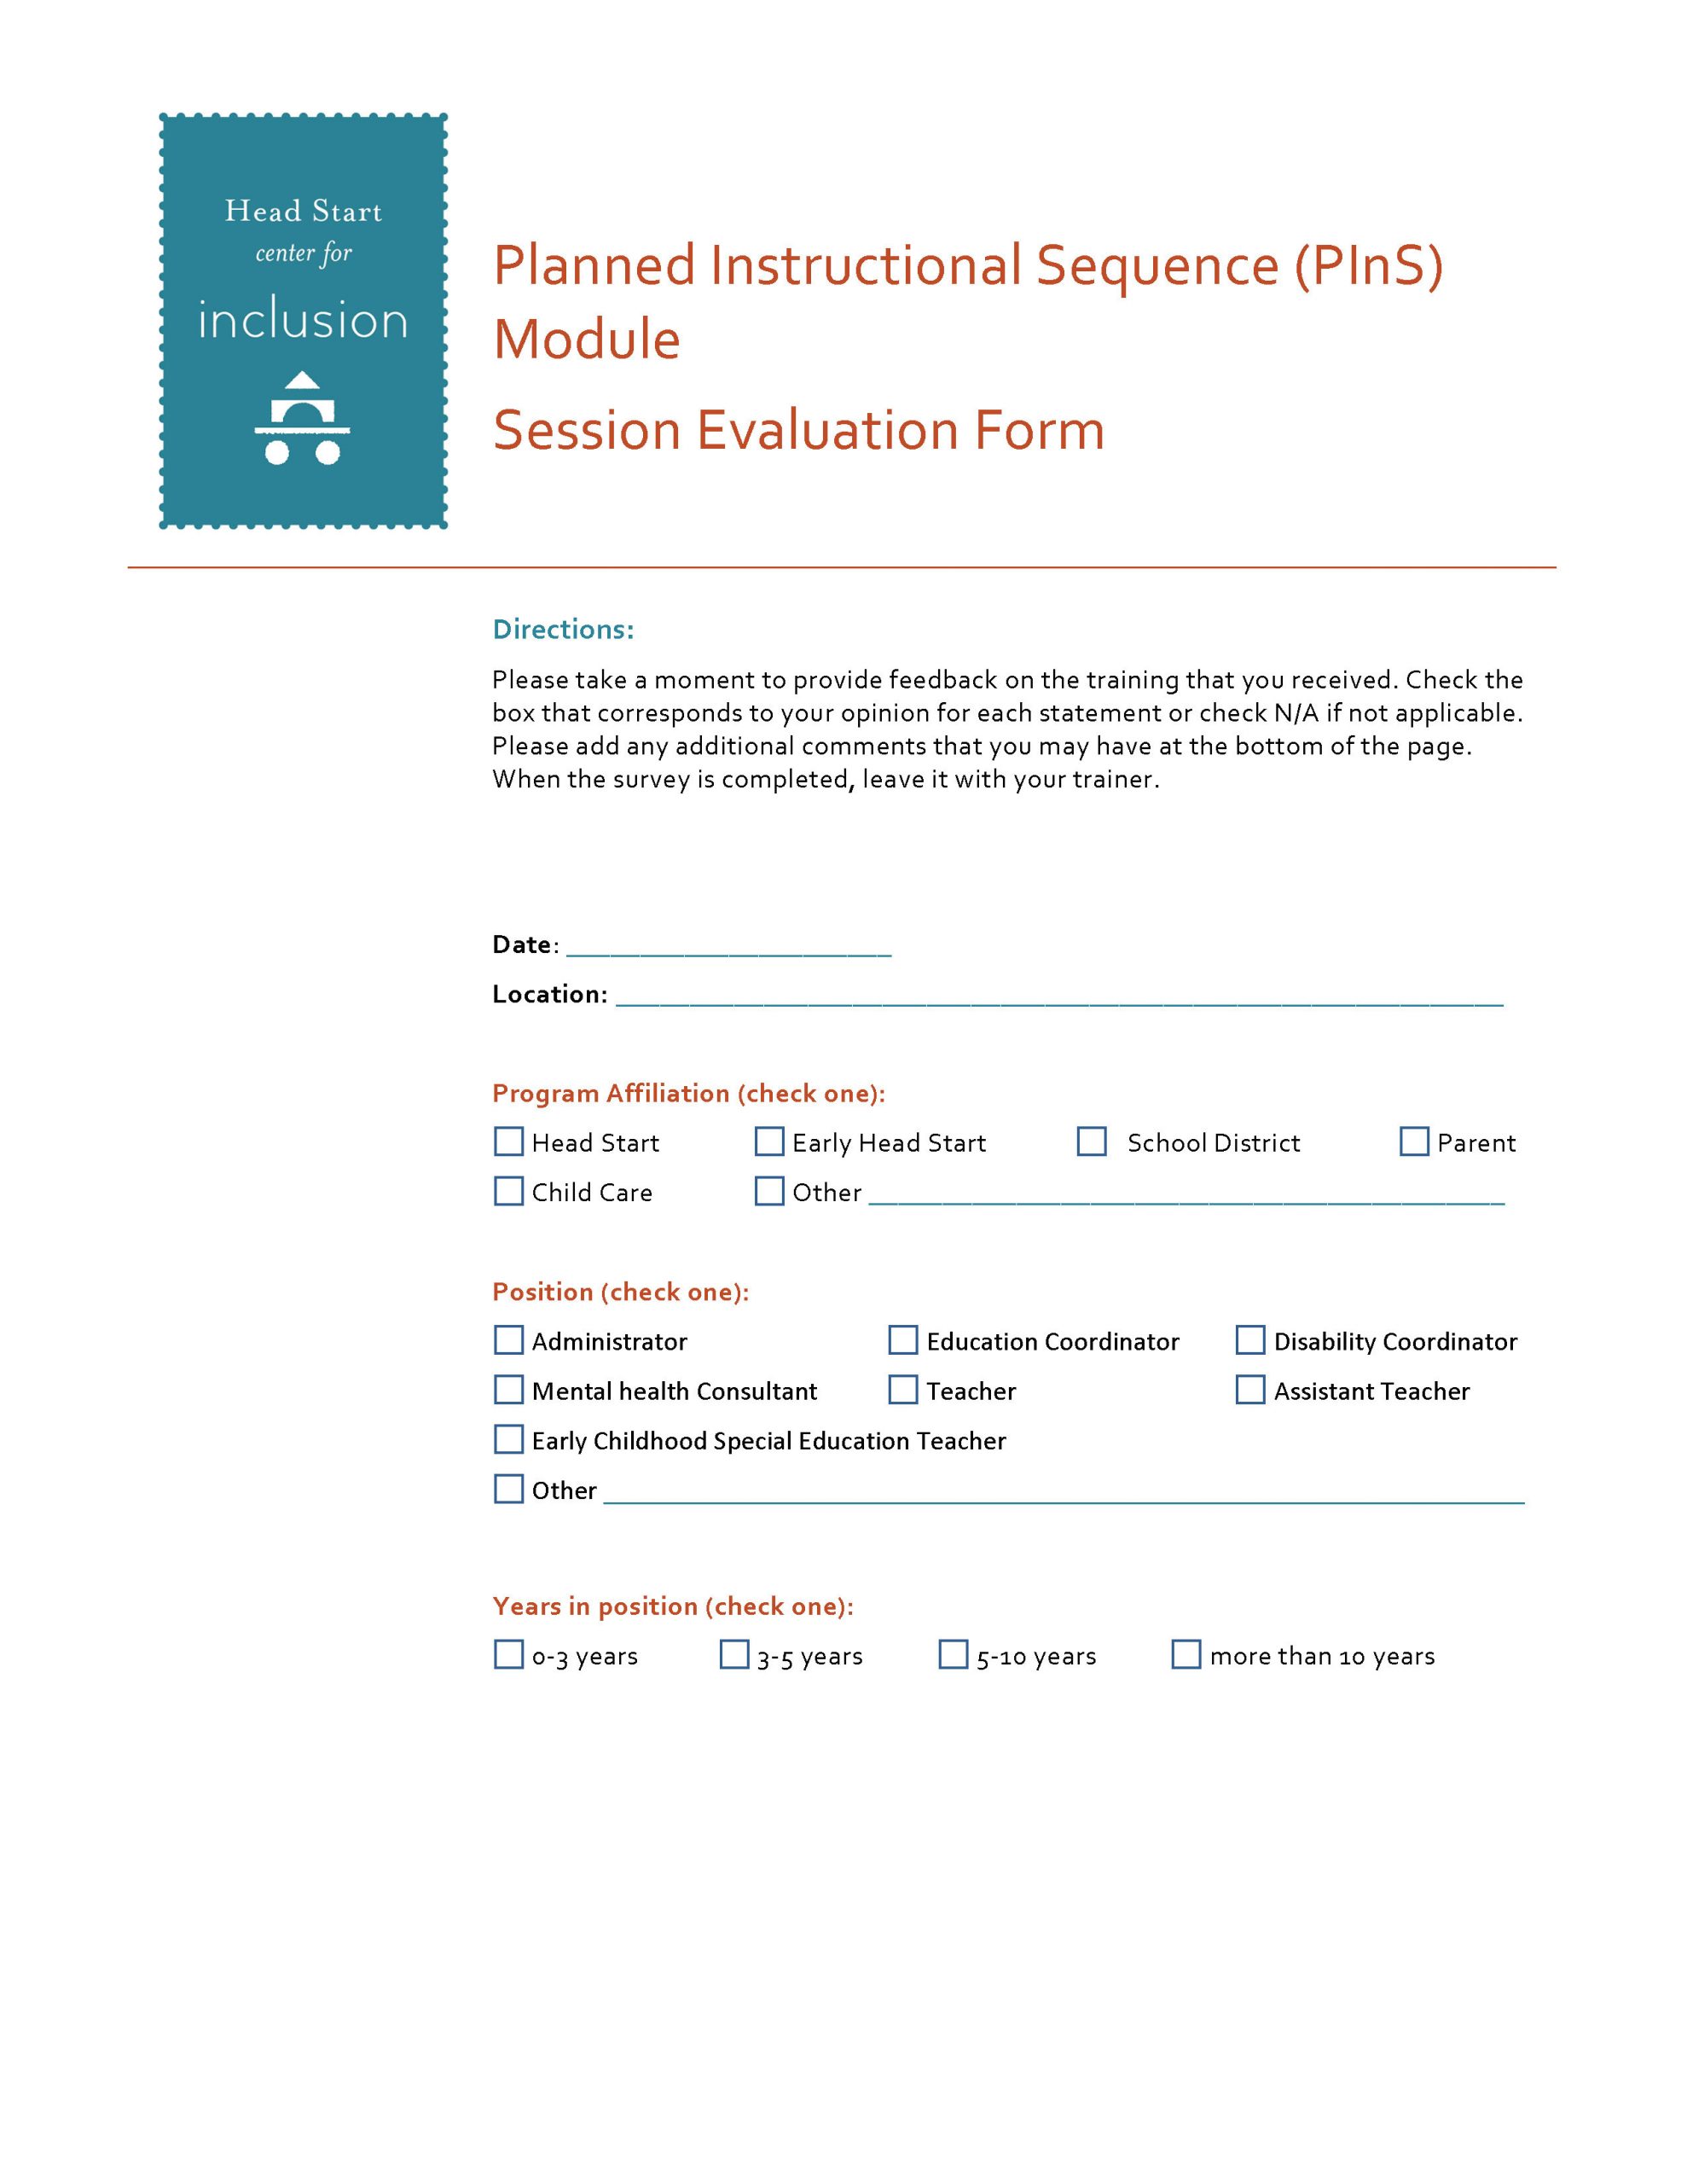 Screenshot of first page of Planned Instructional Sequence(PinS) Module Session Evaluation Form.